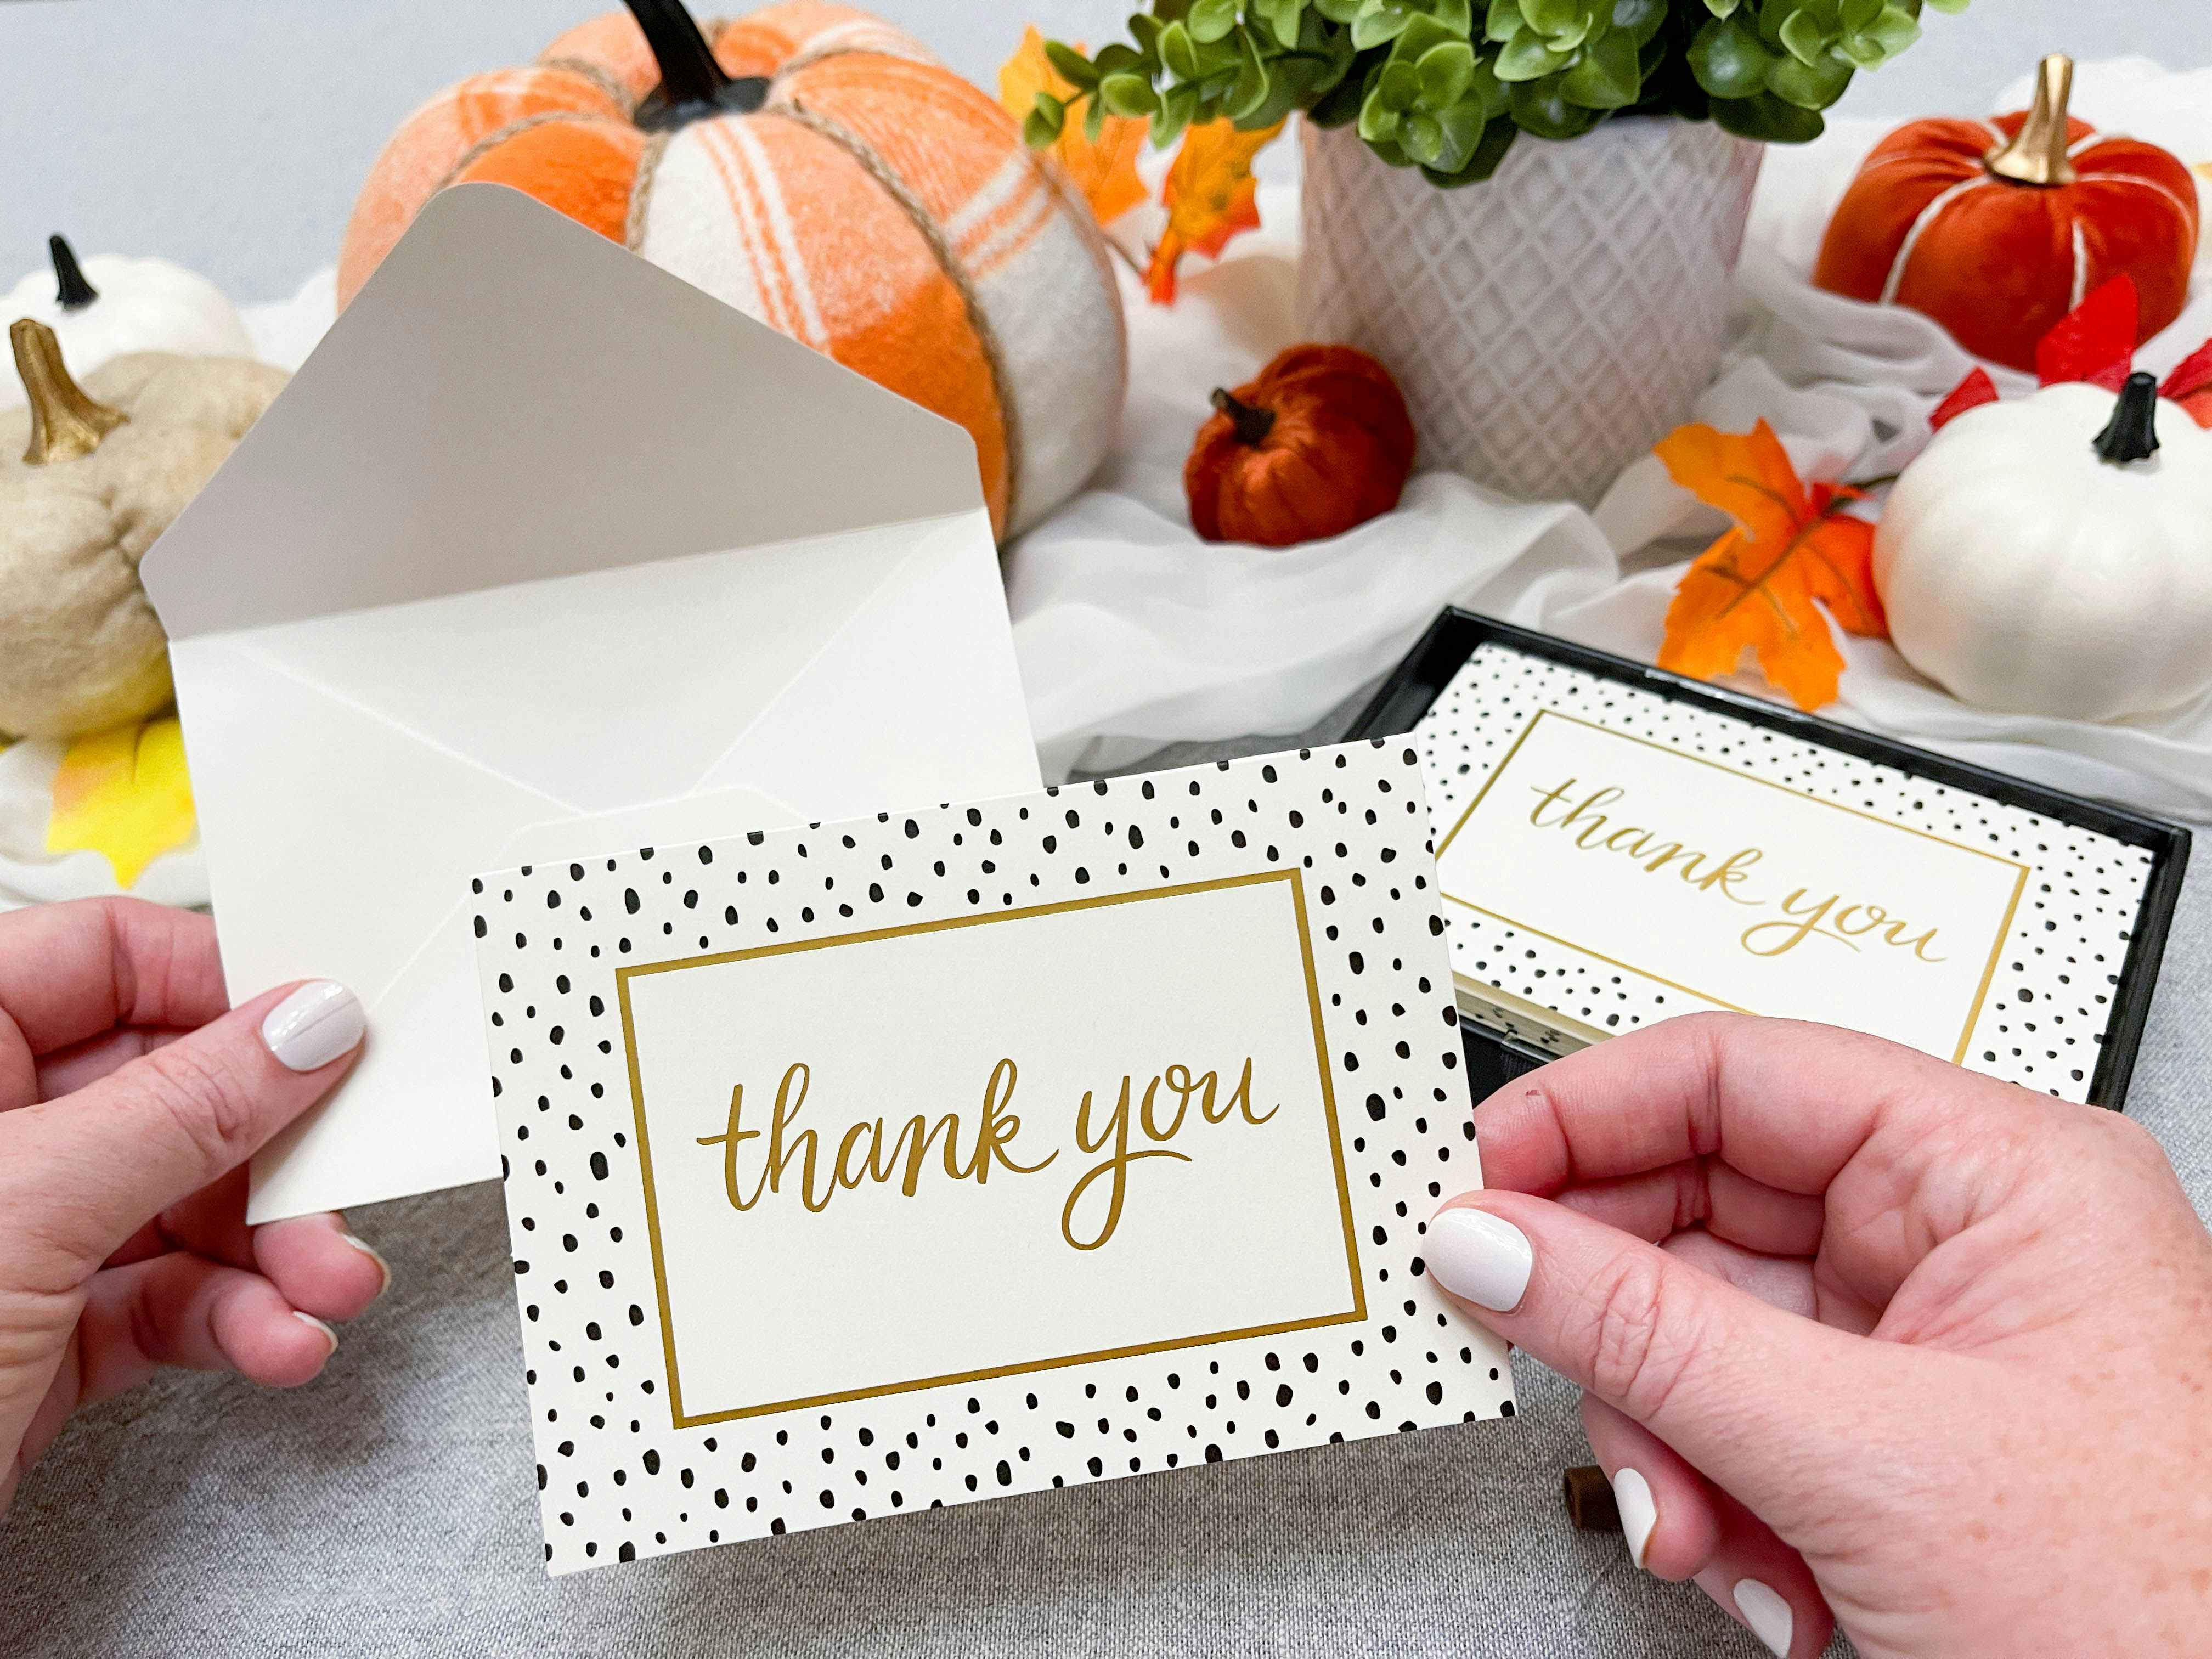 thank you note being held and about to be put into an envelope